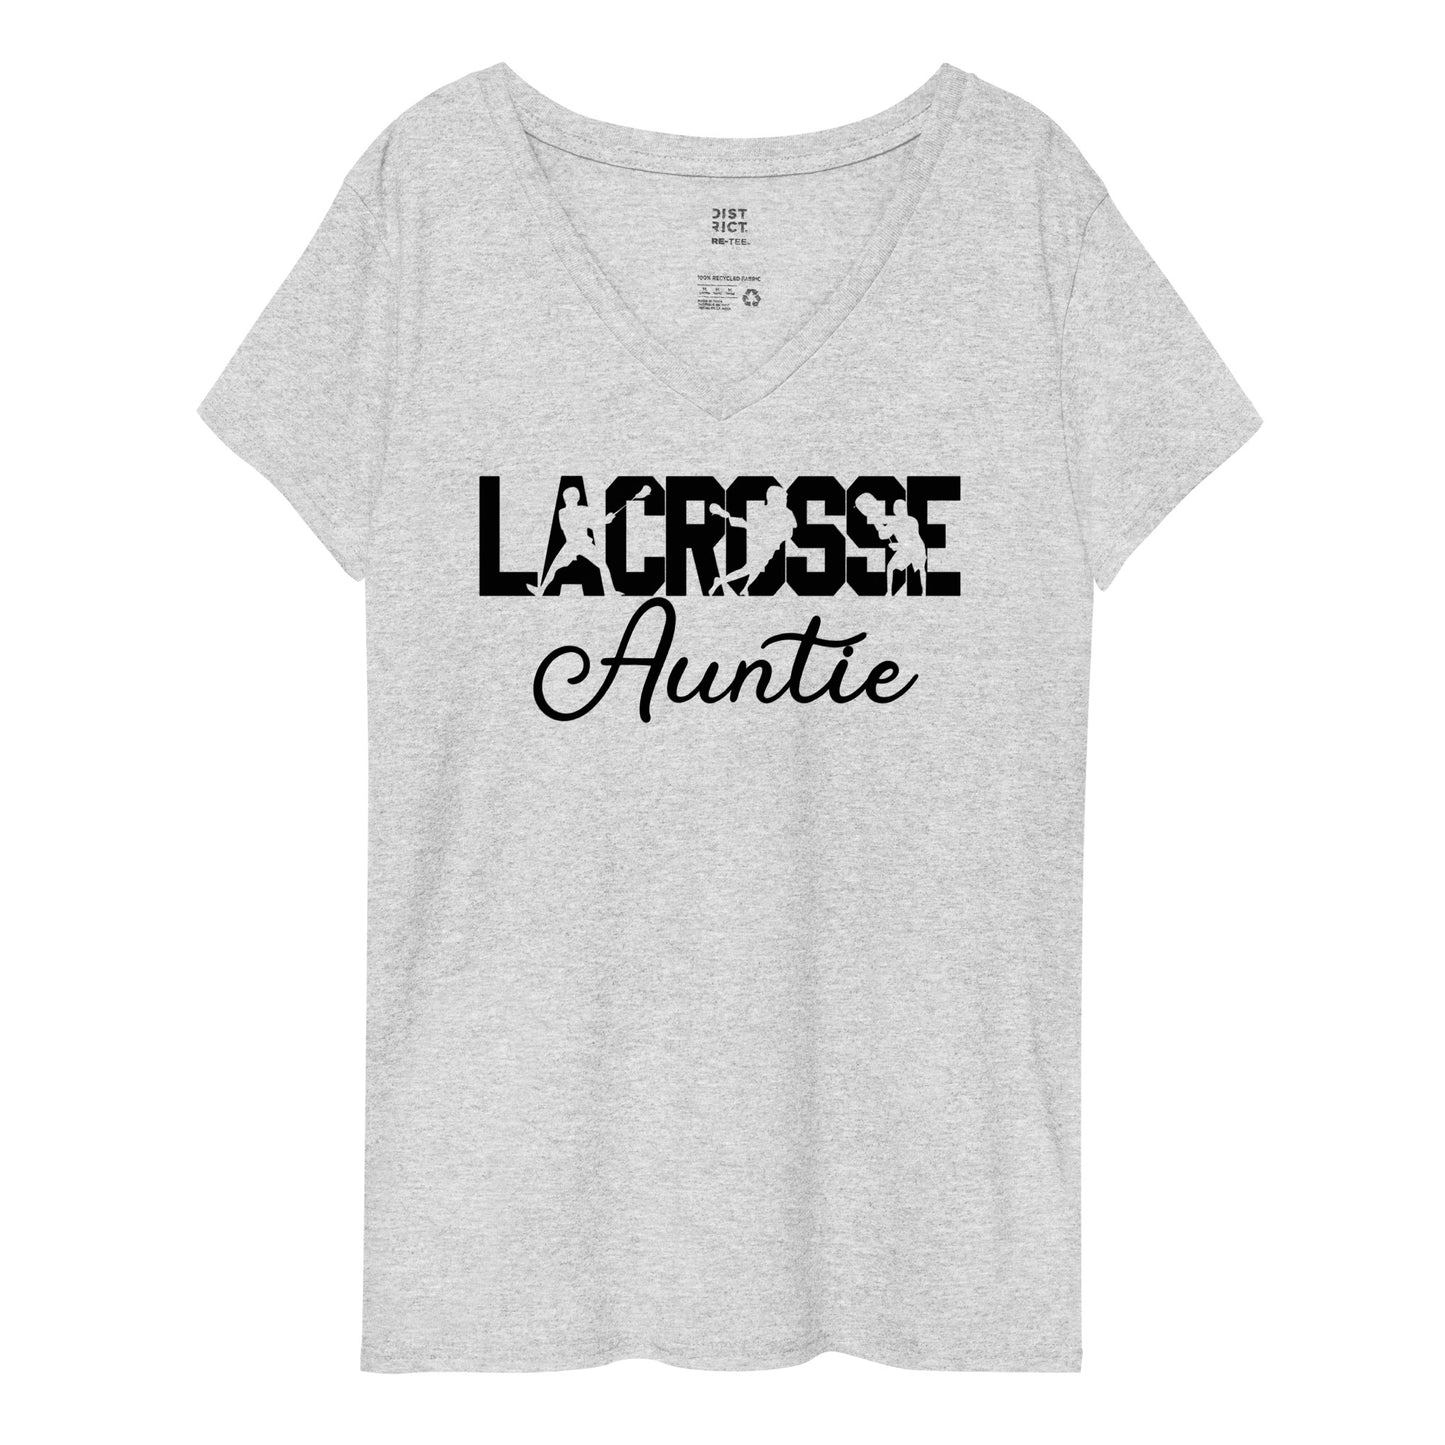 Lacrosse Auntie recycled v-neck t-shirt